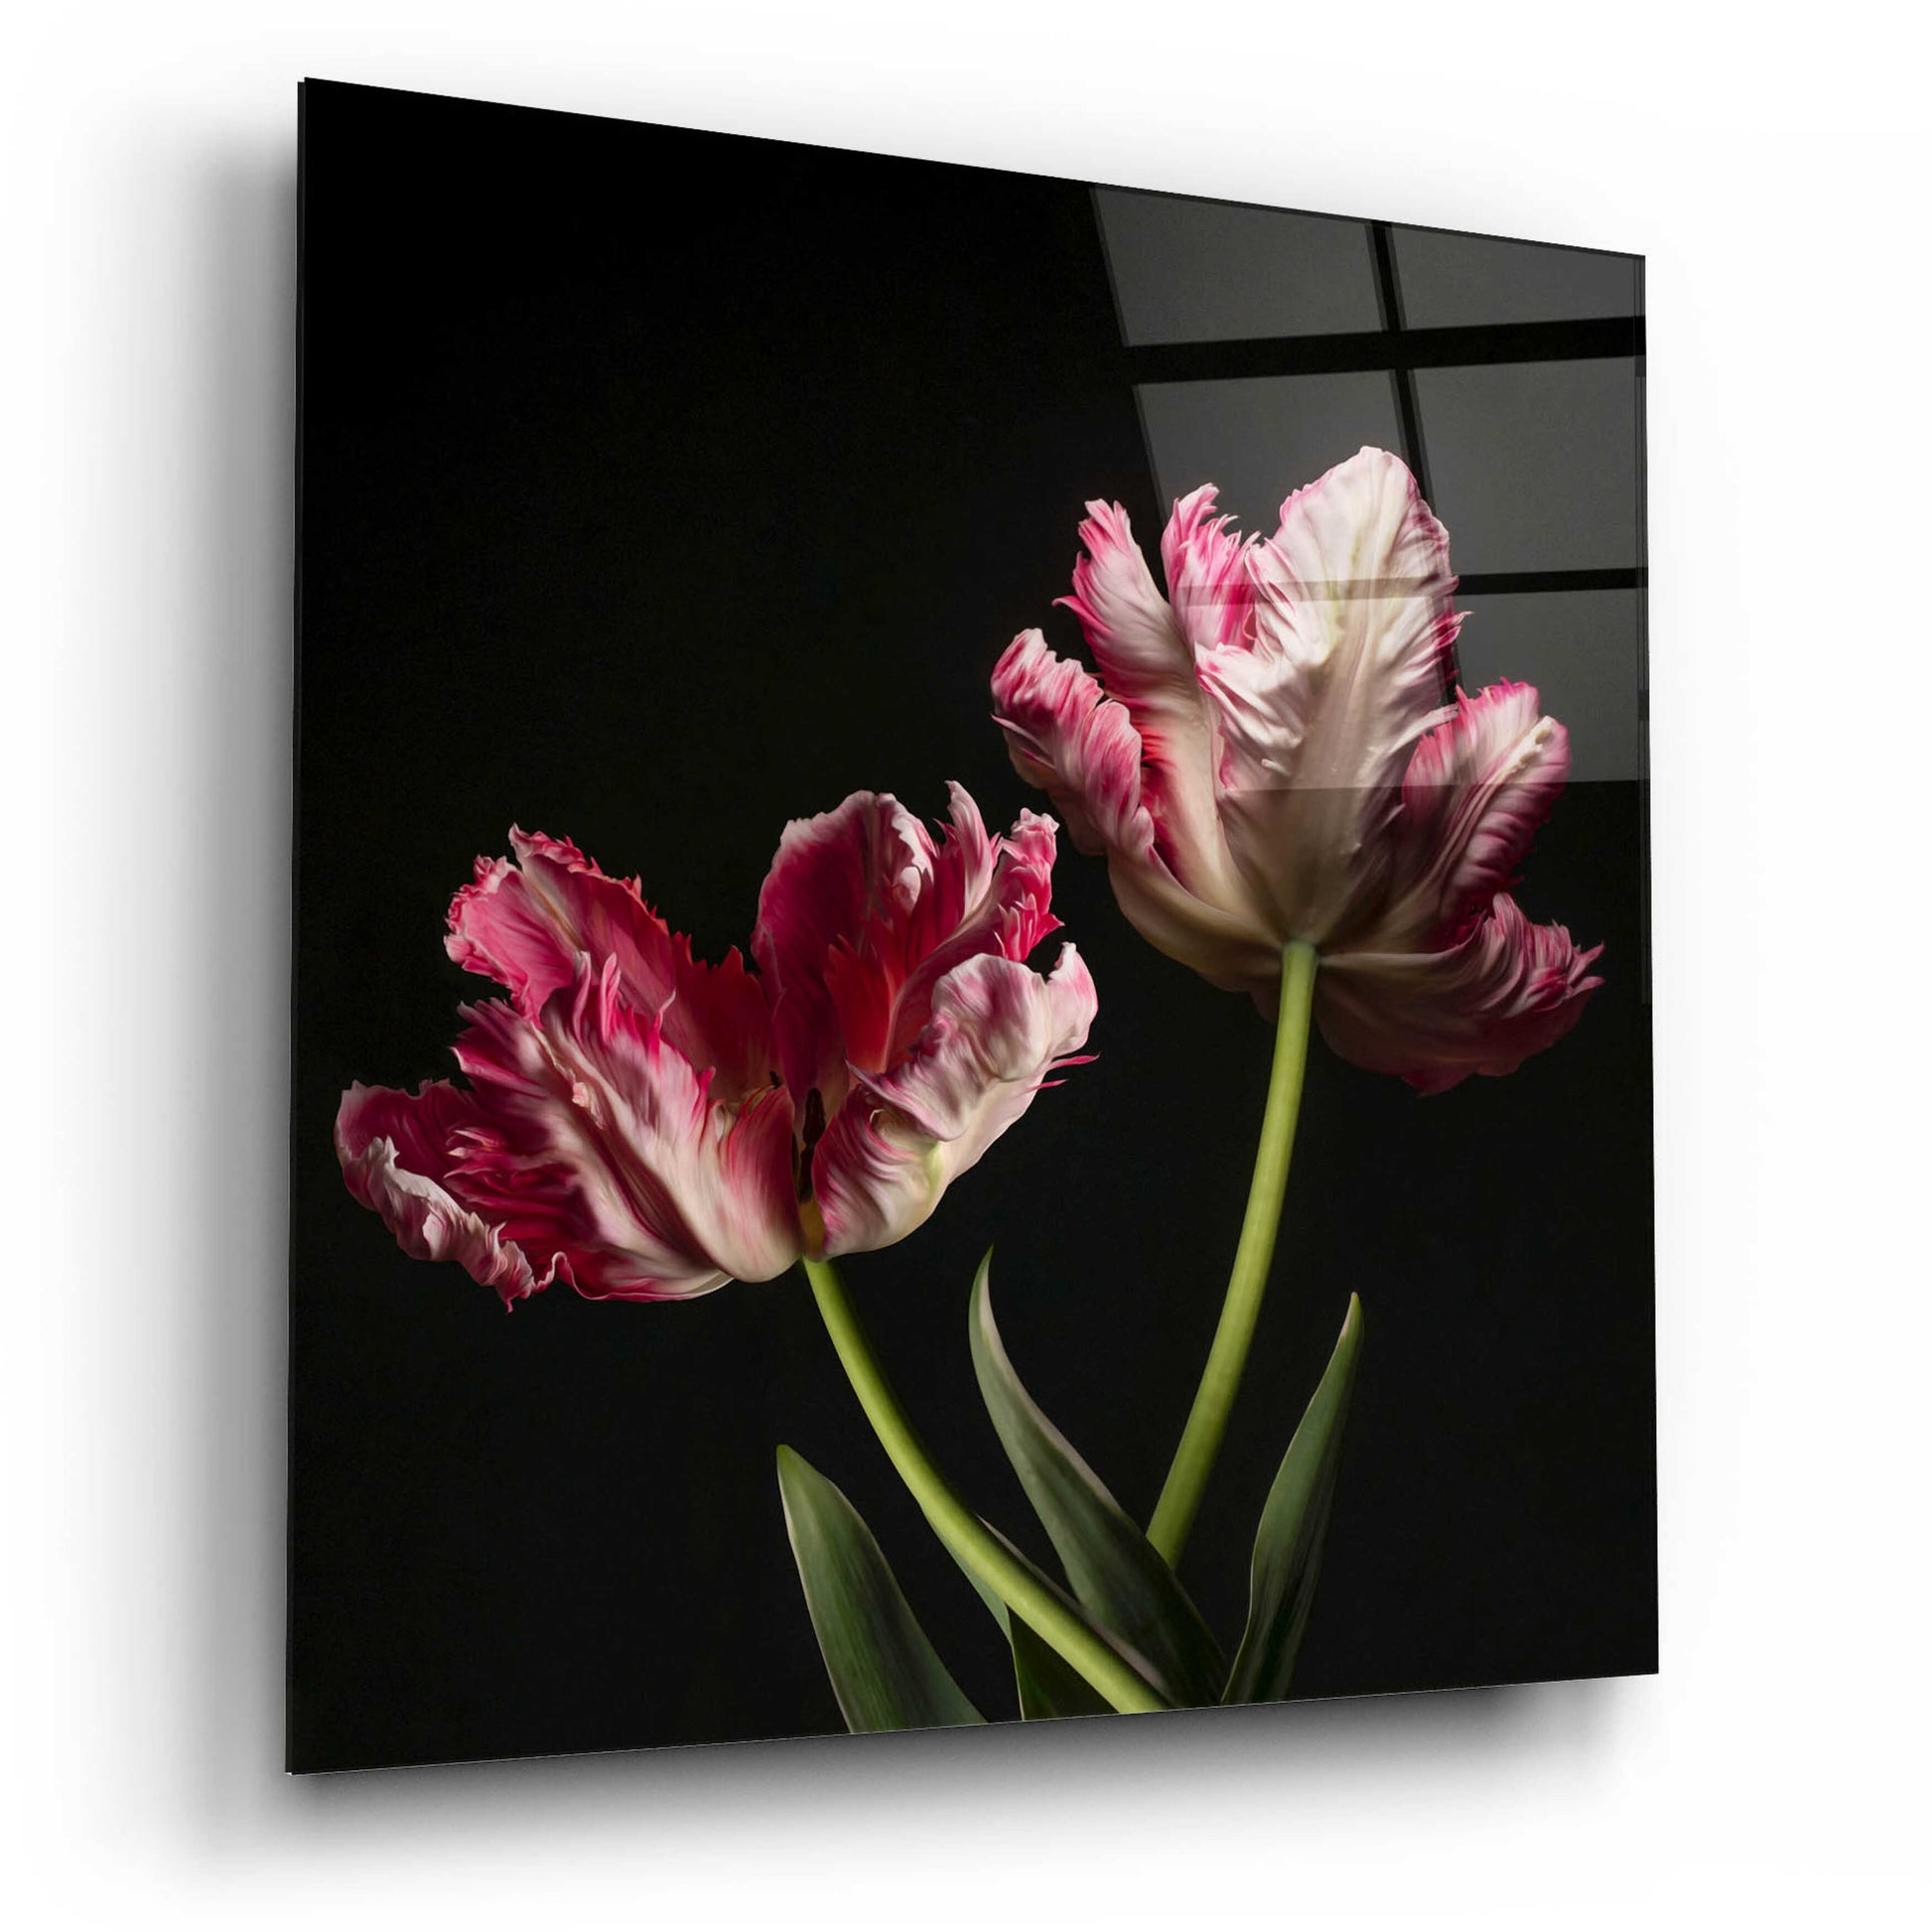 Epic Art 'Open Bloomed Tulips' by Leah McLean, Acrylic Glass Wall Art,12x12